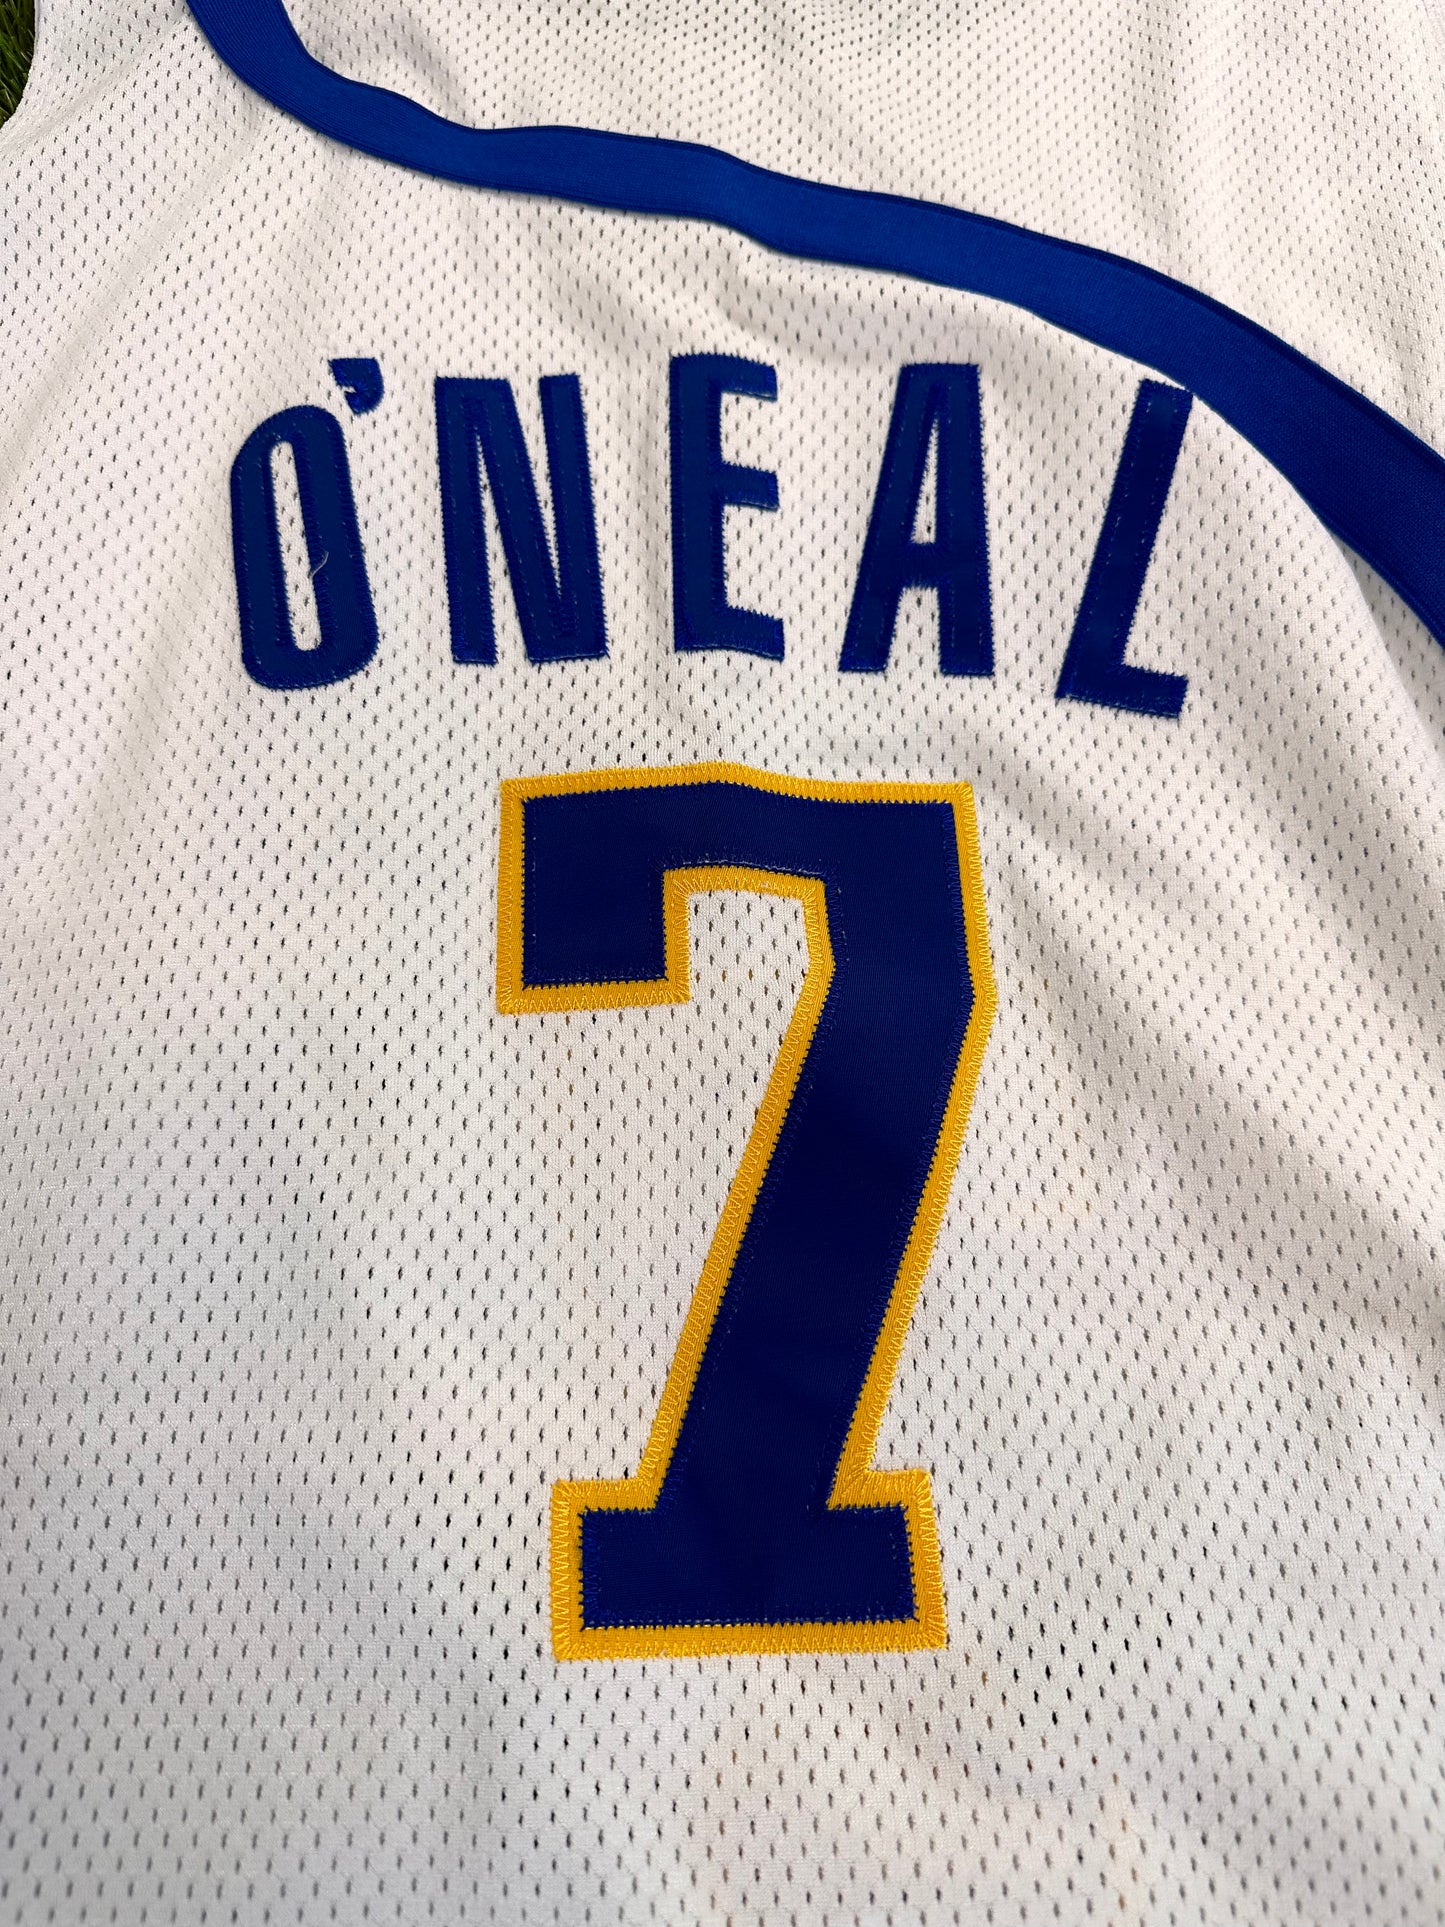 Indiana Pacers 2003-2004 Jermaine O’Neal Throwback NBA Basketball Jersey (52/XXL)